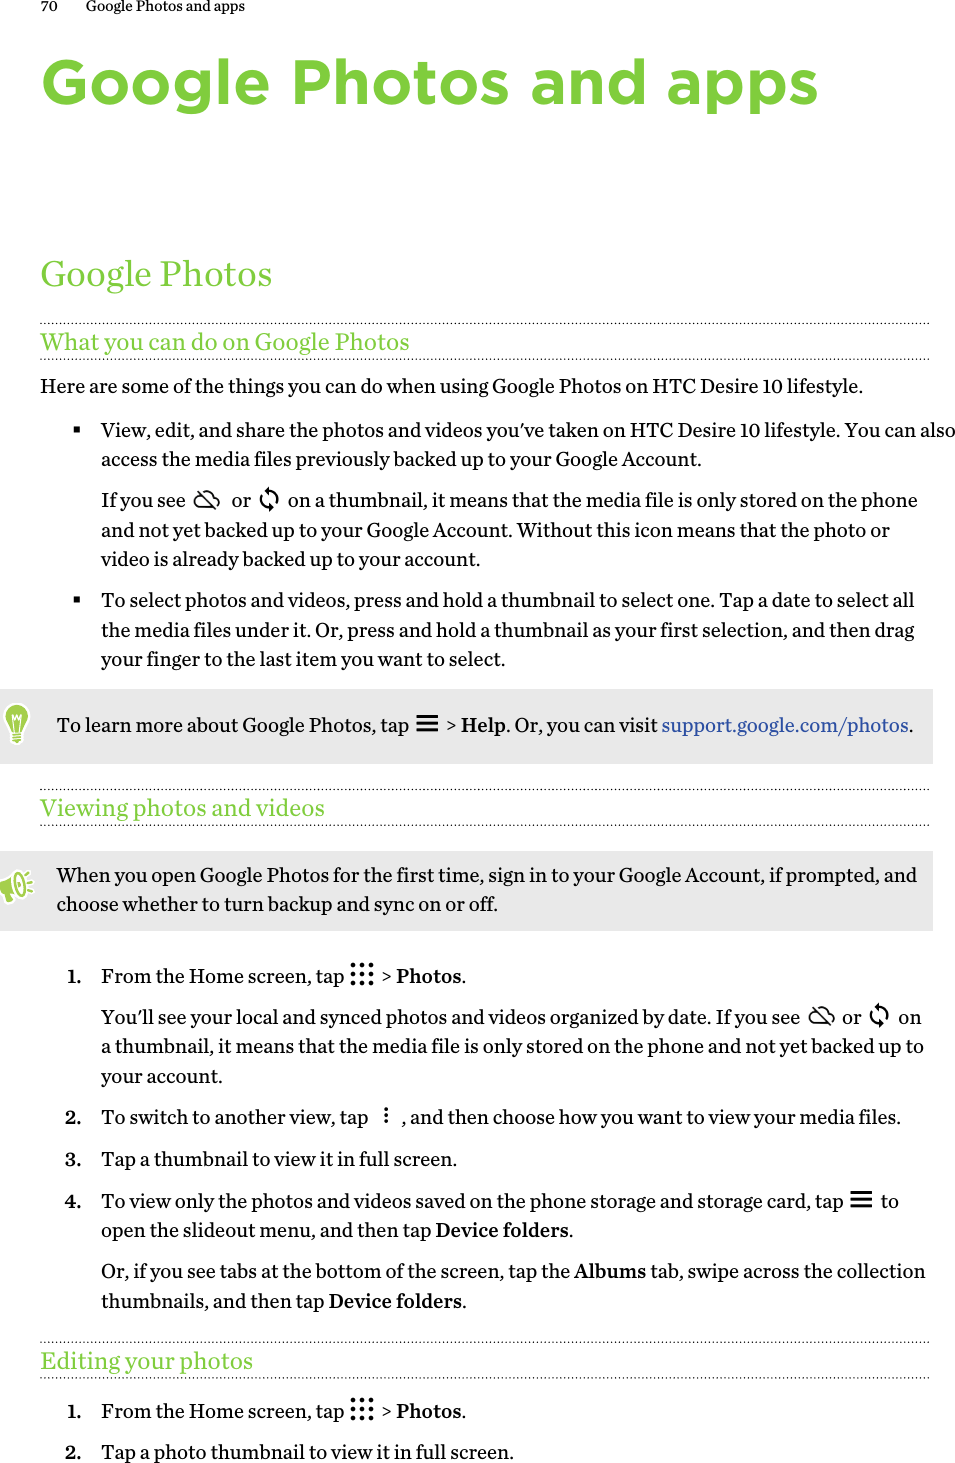 Google Photos and appsGoogle PhotosWhat you can do on Google PhotosHere are some of the things you can do when using Google Photos on HTC Desire 10 lifestyle.§View, edit, and share the photos and videos you&apos;ve taken on HTC Desire 10 lifestyle. You can also access the media files previously backed up to your Google Account.If you see   or   on a thumbnail, it means that the media file is only stored on the phone and not yet backed up to your Google Account. Without this icon means that the photo or video is already backed up to your account.§To select photos and videos, press and hold a thumbnail to select one. Tap a date to select all the media files under it. Or, press and hold a thumbnail as your first selection, and then drag your finger to the last item you want to select.To learn more about Google Photos, tap   &gt; Help. Or, you can visit support.google.com/photos.Viewing photos and videosWhen you open Google Photos for the first time, sign in to your Google Account, if prompted, and choose whether to turn backup and sync on or off.1. From the Home screen, tap   &gt; Photos. You&apos;ll see your local and synced photos and videos organized by date. If you see  or   on a thumbnail, it means that the media file is only stored on the phone and not yet backed up to your account.2. To switch to another view, tap  , and then choose how you want to view your media files.3. Tap a thumbnail to view it in full screen.4. To view only the photos and videos saved on the phone storage and storage card, tap   to open the slideout menu, and then tap Device folders.Or, if you see tabs at the bottom of the screen, tap the Albums tab, swipe across the collection thumbnails, and then tap Device folders.Editing your photos1. From the Home screen, tap   &gt; Photos.2. Tap a photo thumbnail to view it in full screen.70 Google Photos and apps